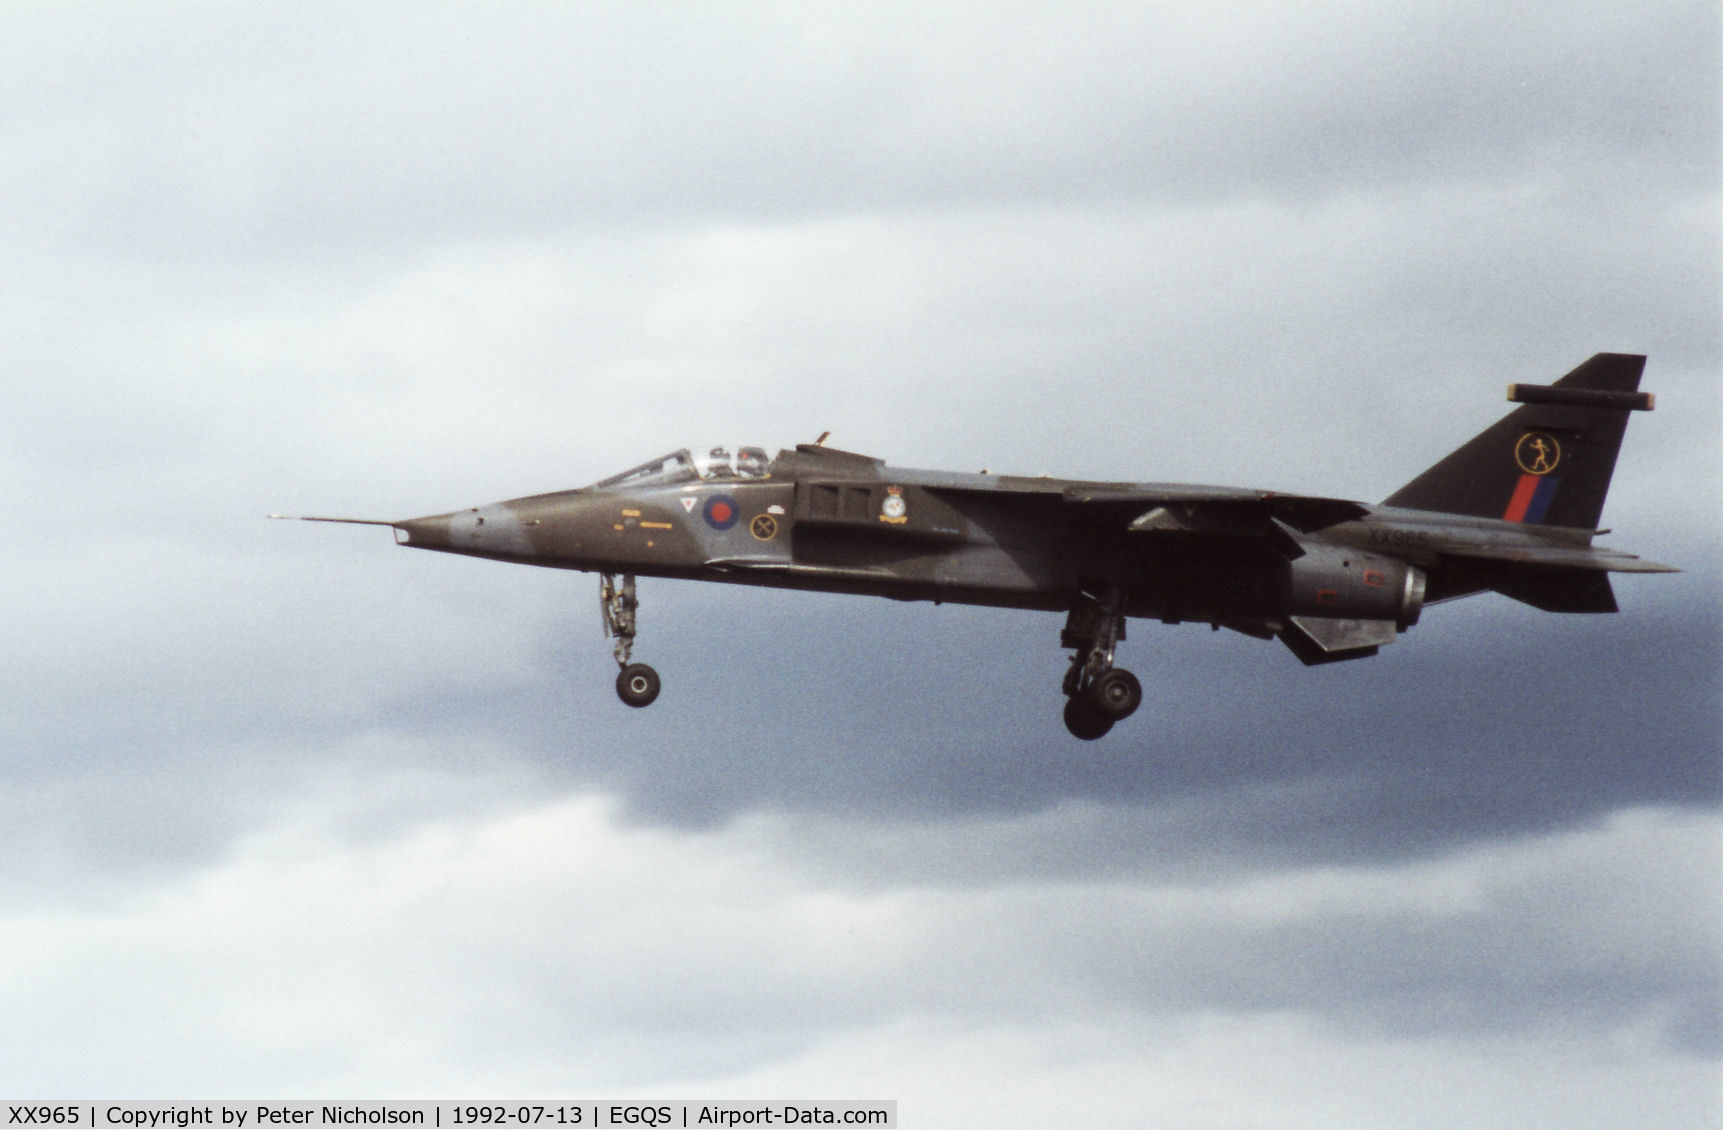 XX965, 1975 Sepecat Jaguar GR.1A C/N S.87, Jaguar GR.1A of 226 Operational Conversion Unit at RAF Lossiemouth on final approach there in the Summer of 1992.